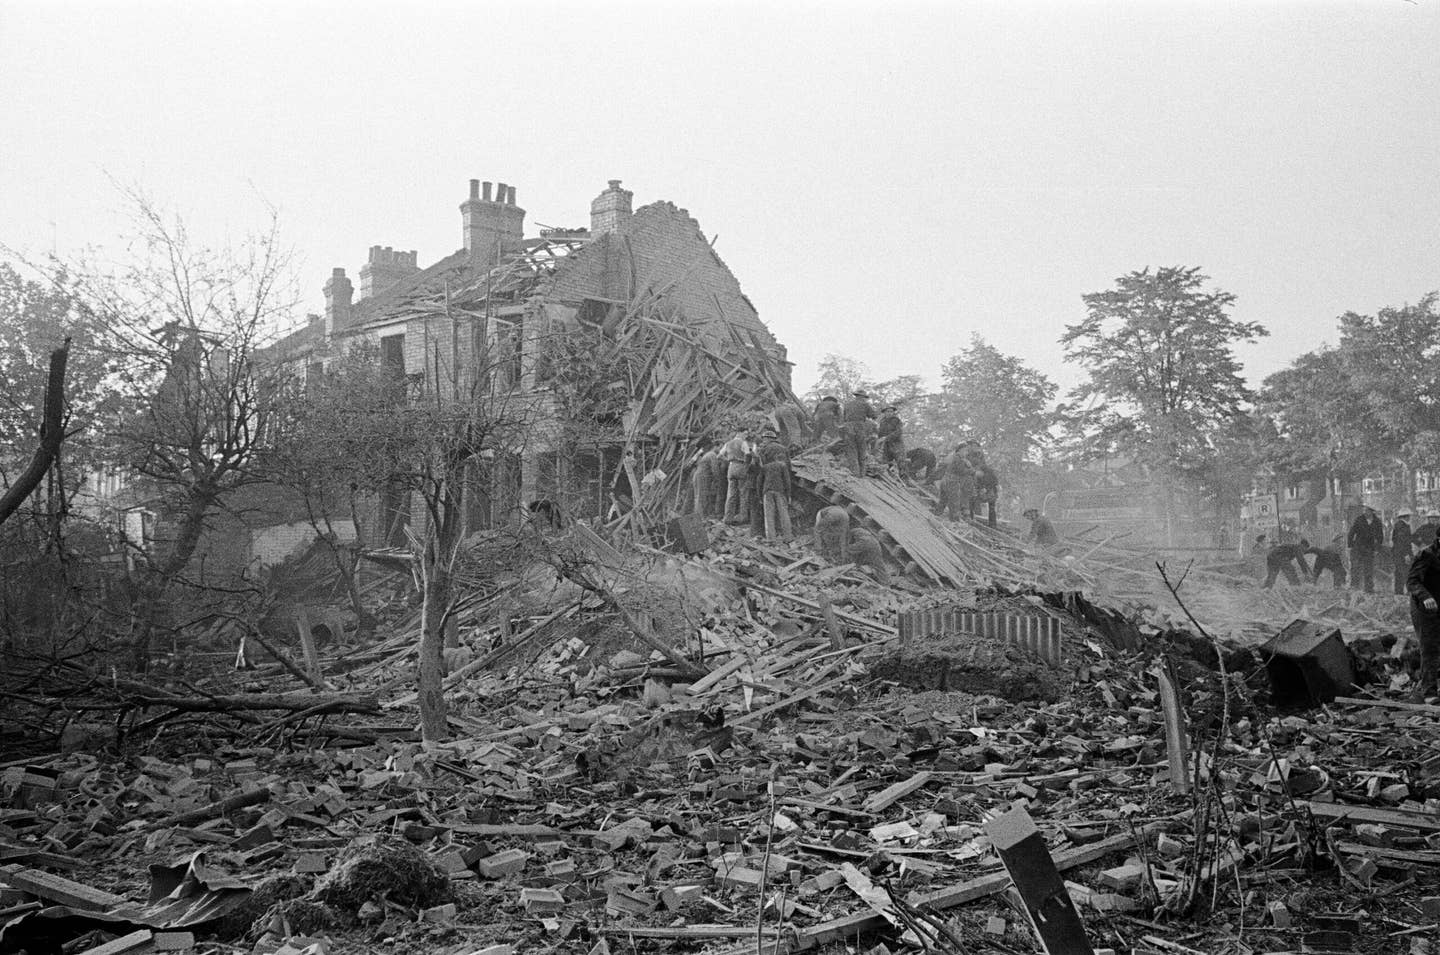 The aftermath of a V-2 rocket strike at Tewkesbury Terrace, Bounds Green Road, Southgate, London, September 16, 1944. <em>Photo by Daily Mirror/Mirrorpix via Getty Images</em>